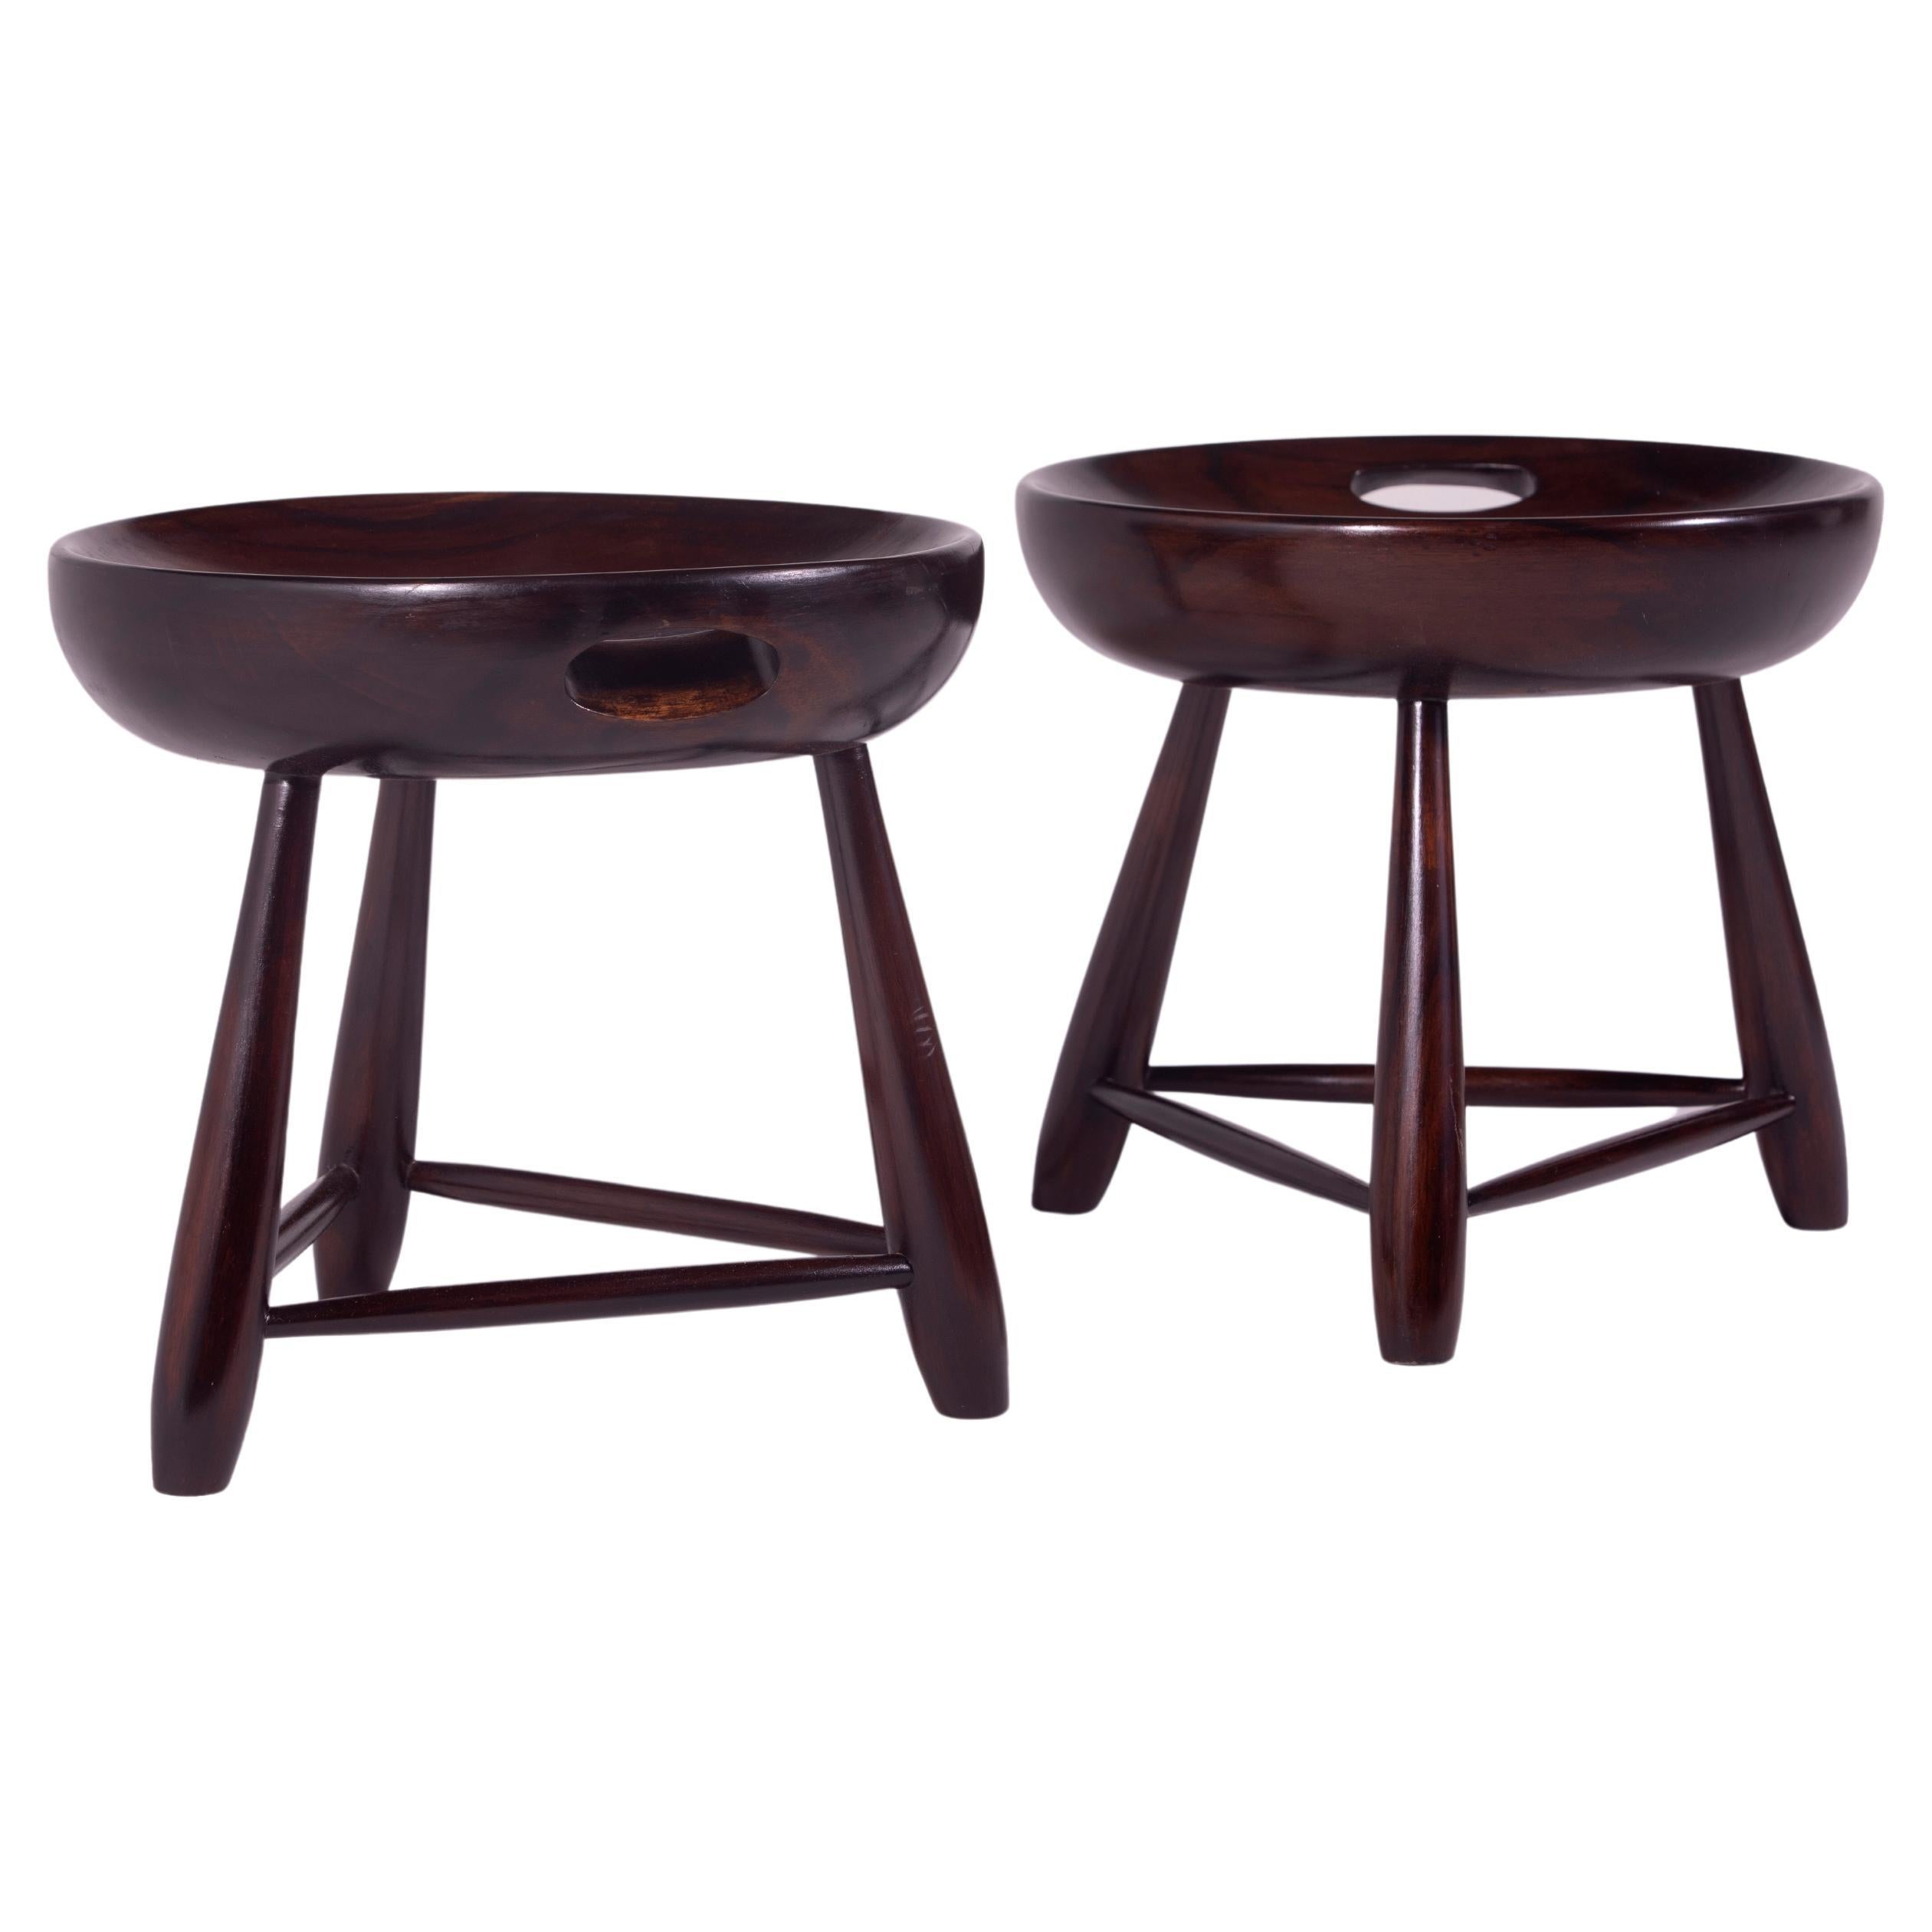 Mid-Century Modern Pair of "Mocho" Stools by Sergio Rodrigues, Brazil, 1960s For Sale